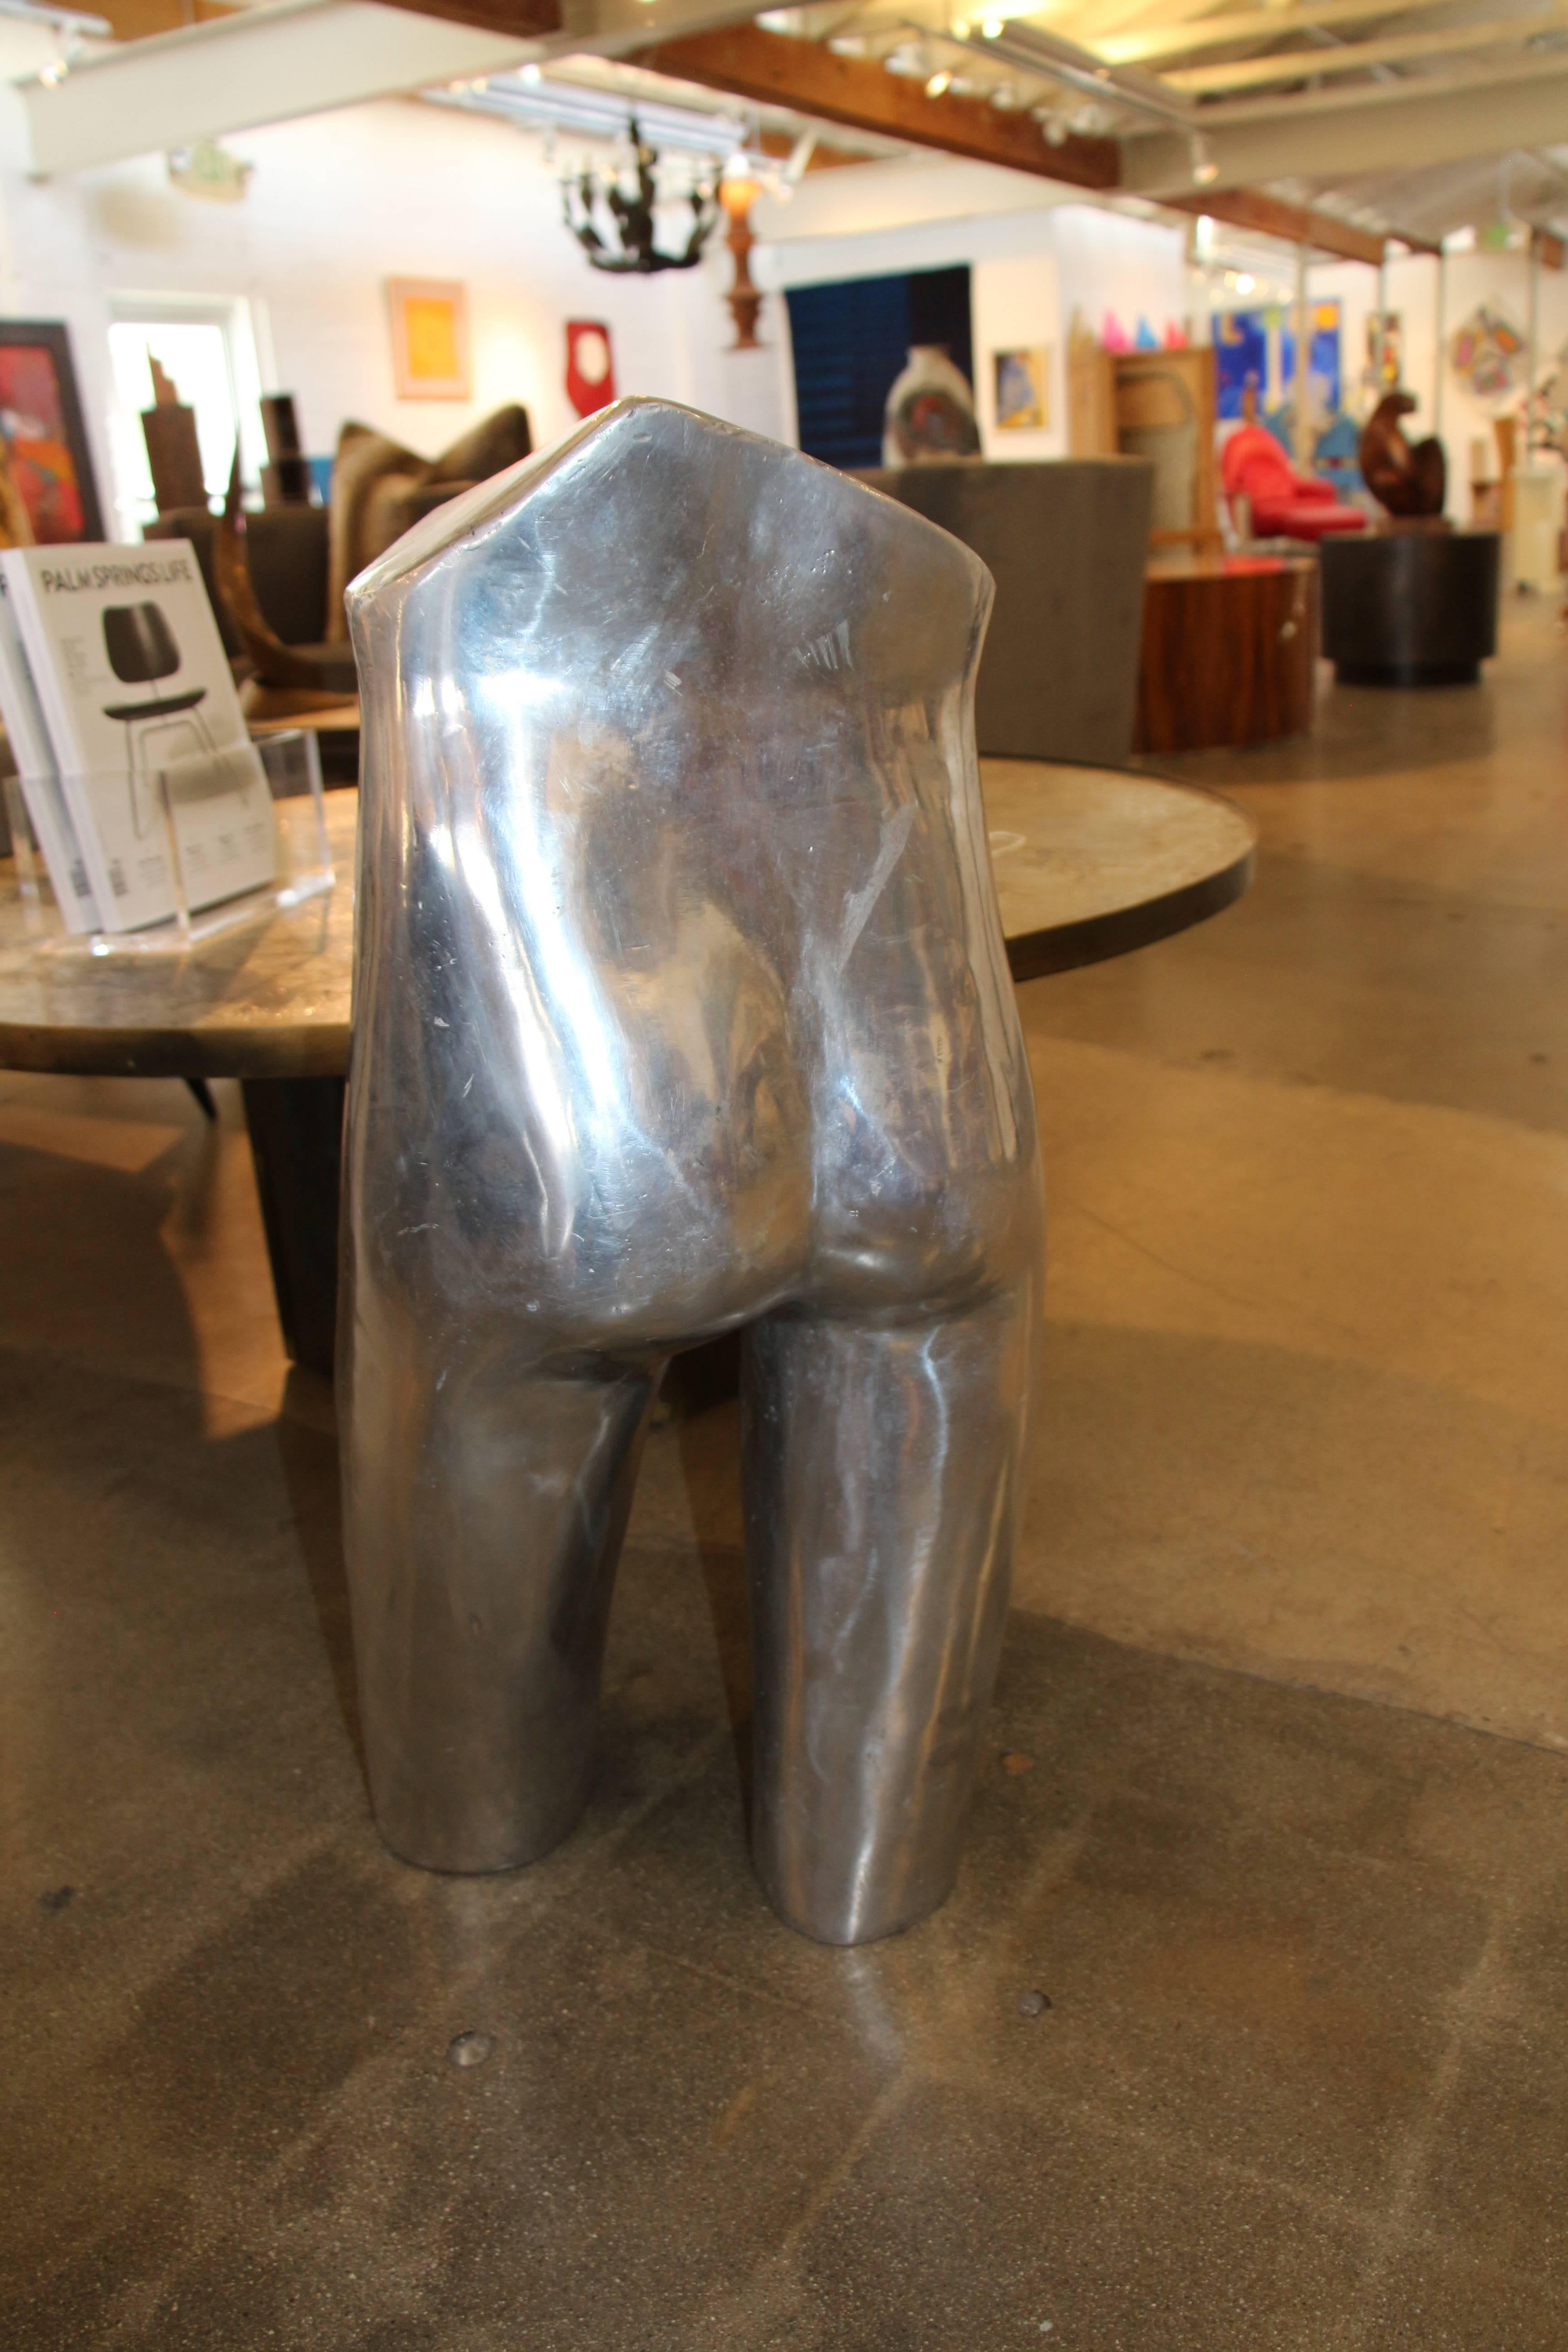 A nice torso cast of aluminium I believe in the form of a nude male. These appears to be a cast with quite a few repairs, see the detailed photos. Quite a few holes in the casting process. A nice sculpture.